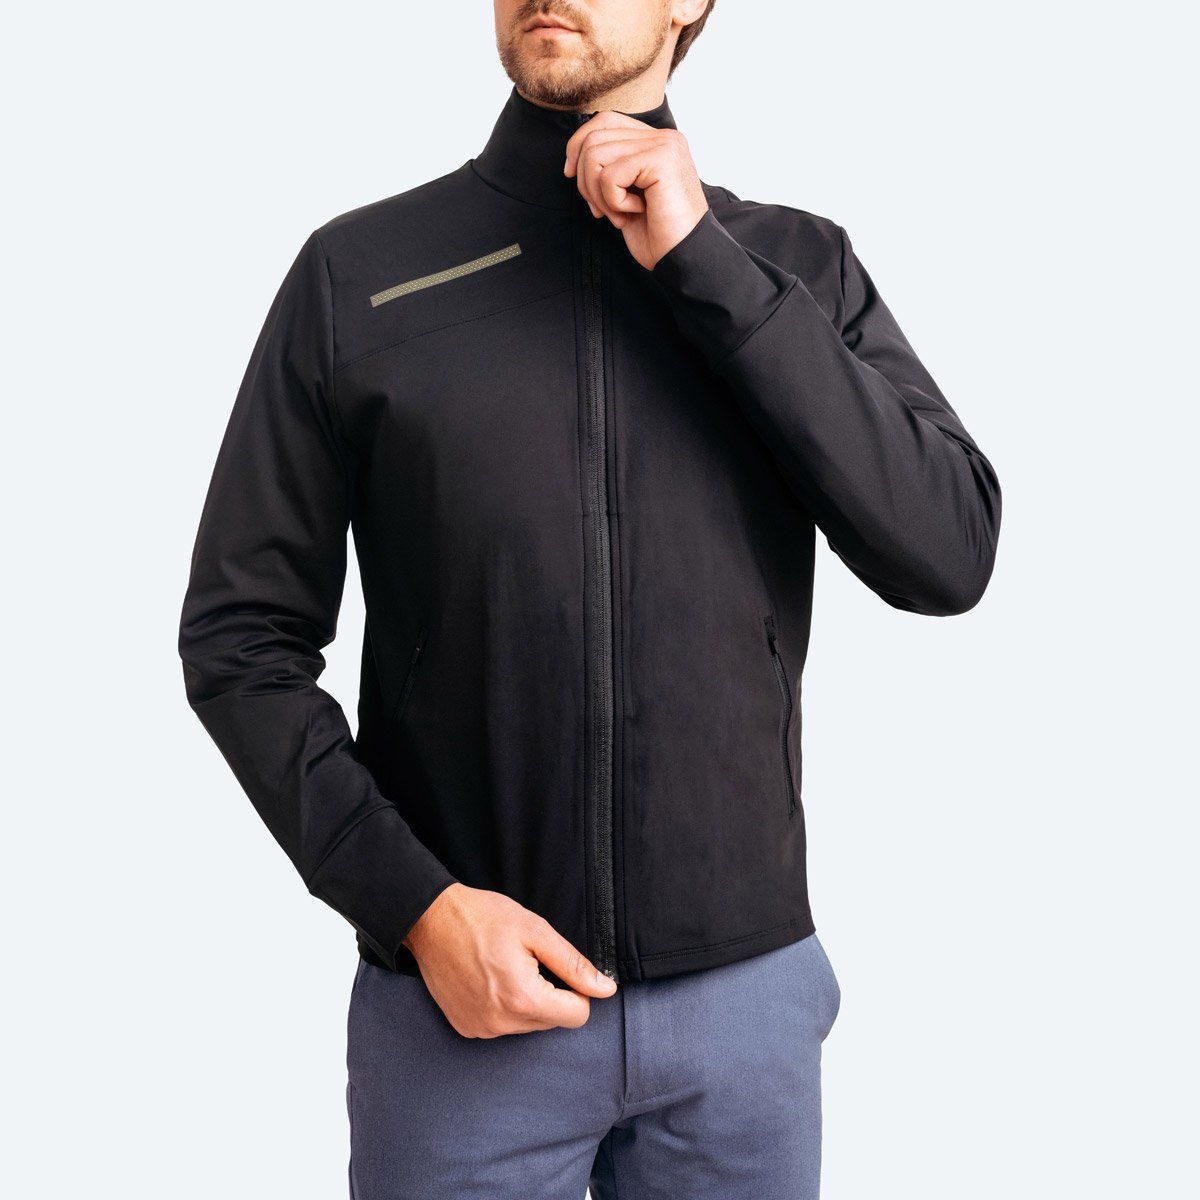 Ministry of Supply Commuter Jacket